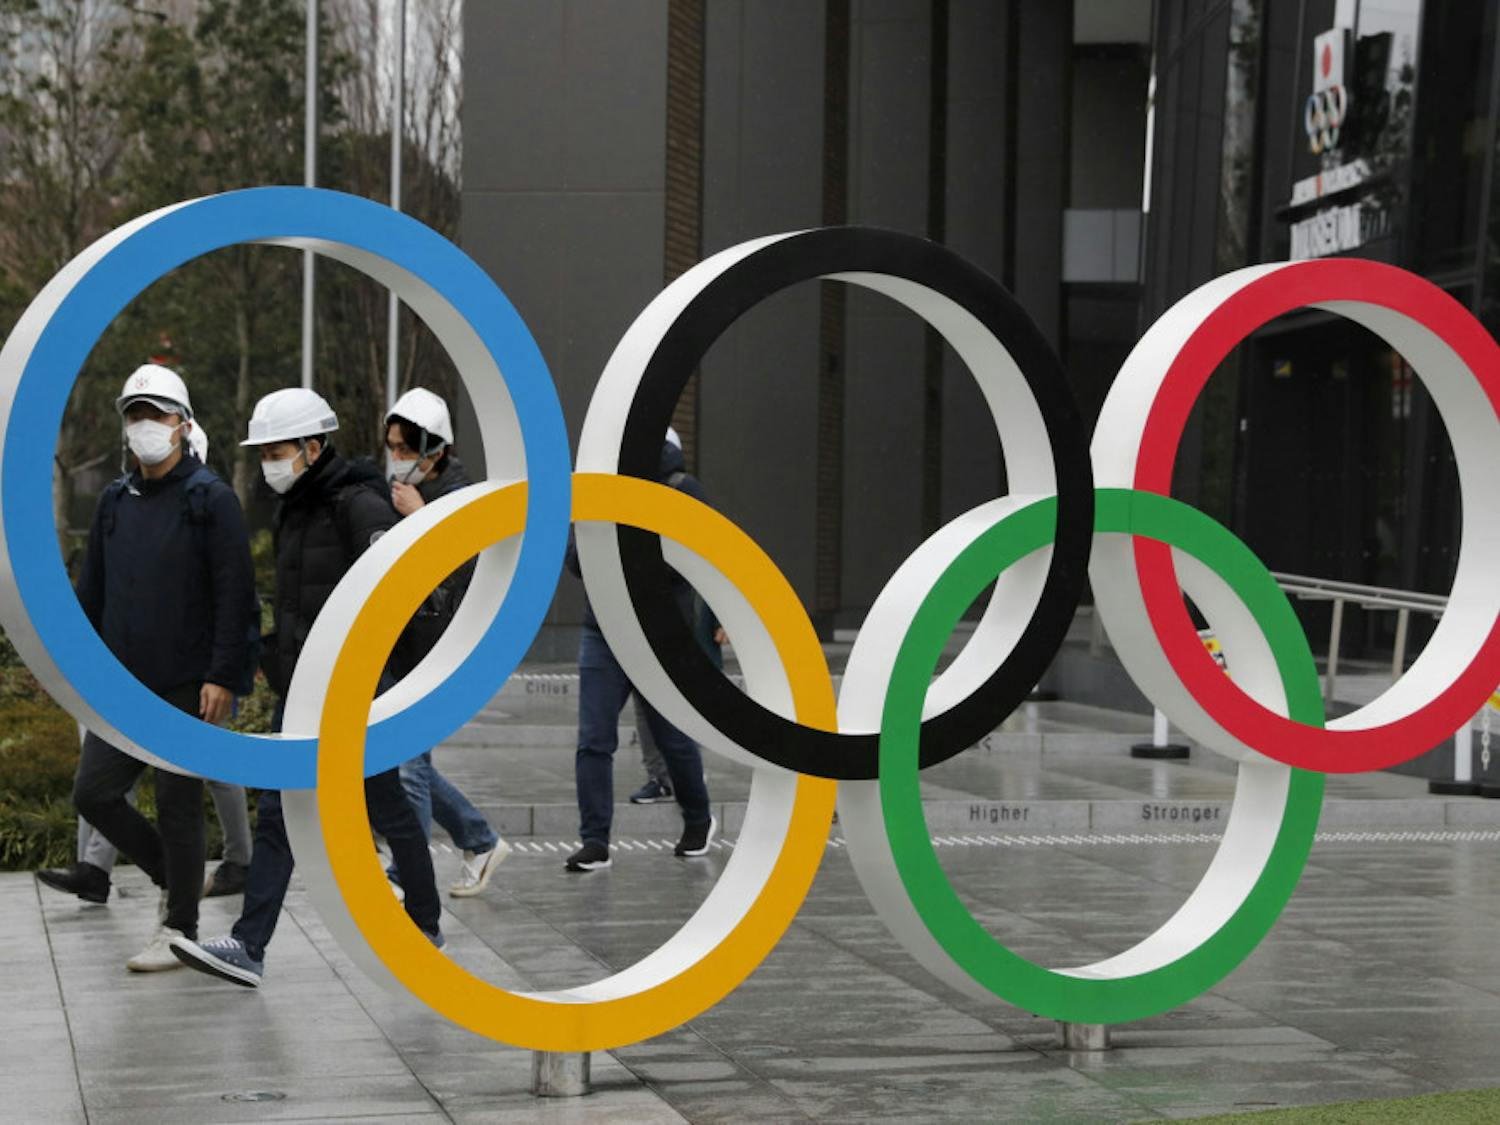 FILE - In this March 4, 2020, file photo, people wearing masks walk past the Olympic rings near the New National Stadium in Tokyo. It's been 2 1/2 months since the Tokyo Olympics were postponed until next year because of the COVID-19 pandemic. So where do the games stand? So far, many ideas about how the Olympic can take place are being floated by the International Olympic Committee, Japanese officials and politicians, and in unsourced Japanese newspaper articles coming from local organizers and politicians. The focus is on soaring costs, fans, or no fans, possible quarantines for athletes, and cutting back to only “the essentials." (AP Photo/Jae C. Hong, File)